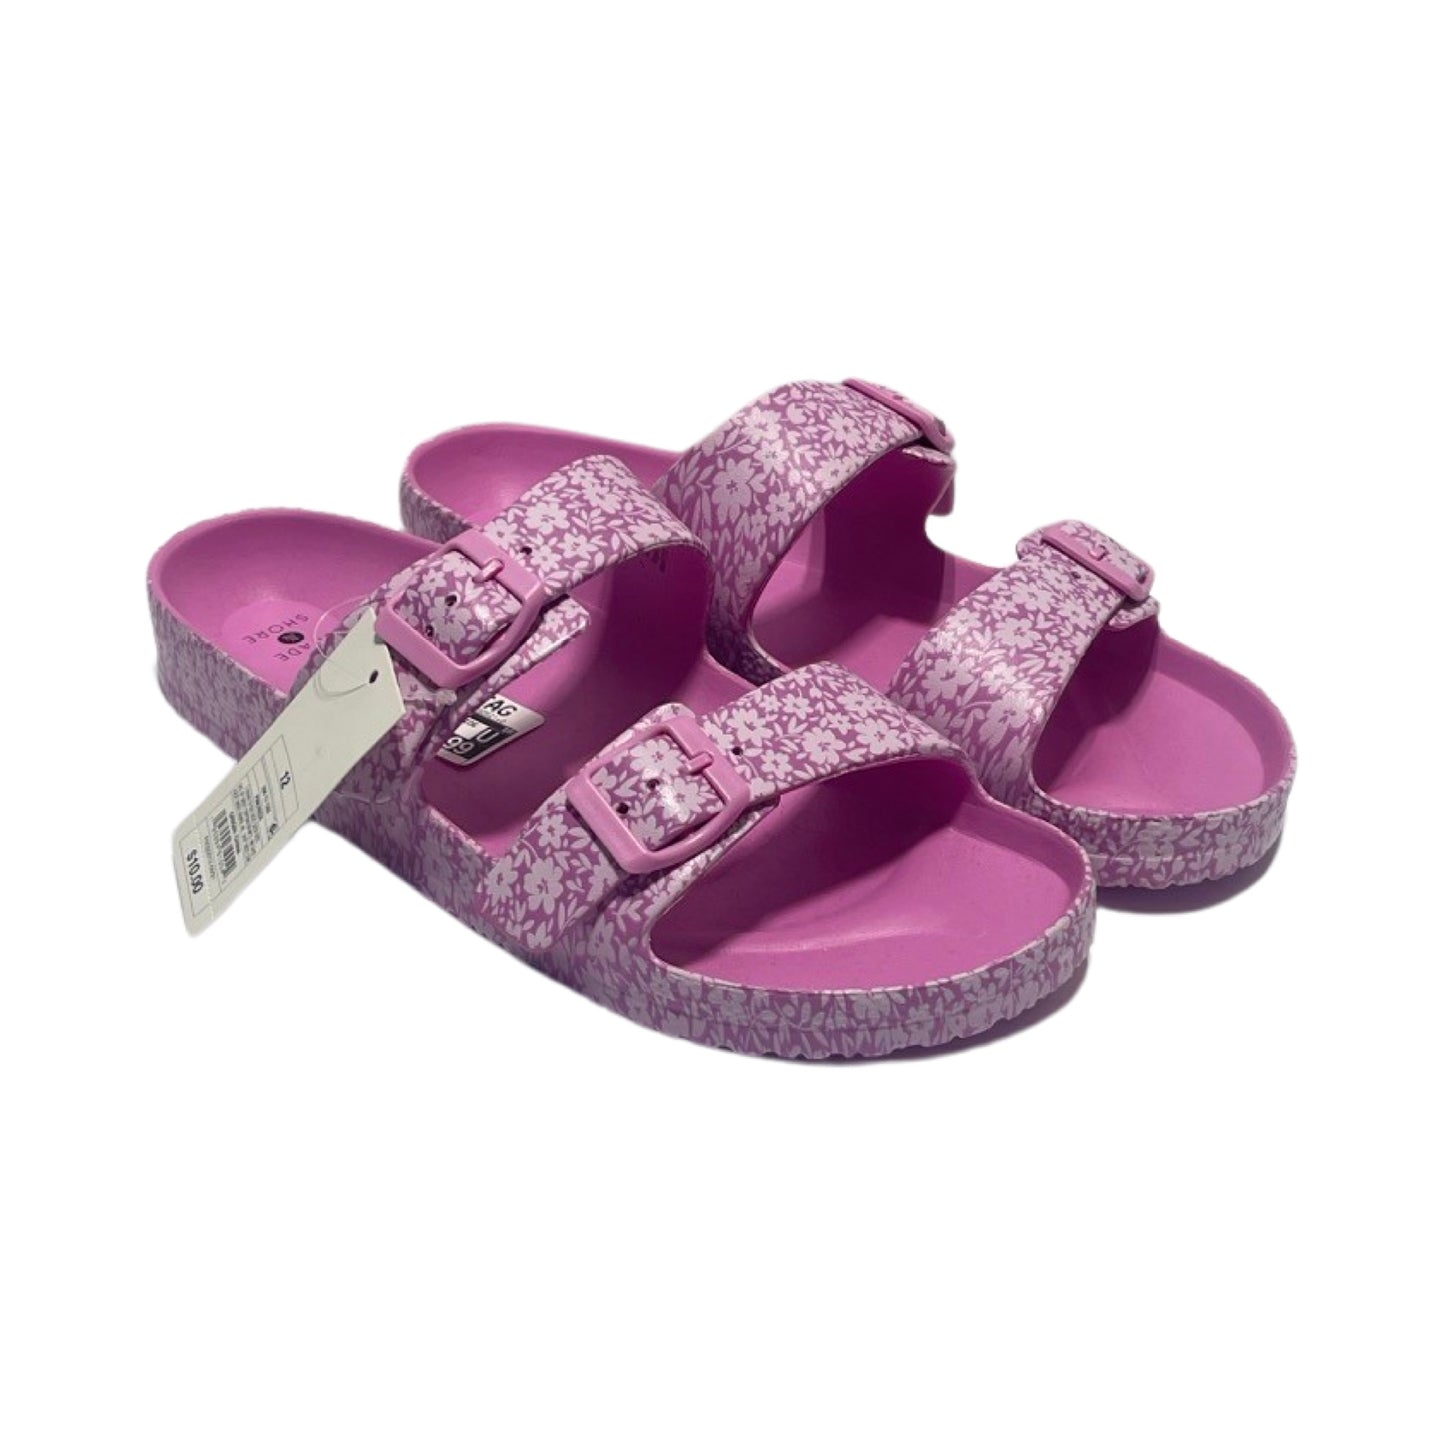 Shoes Flats Mule & Slide By Target  Size: 12